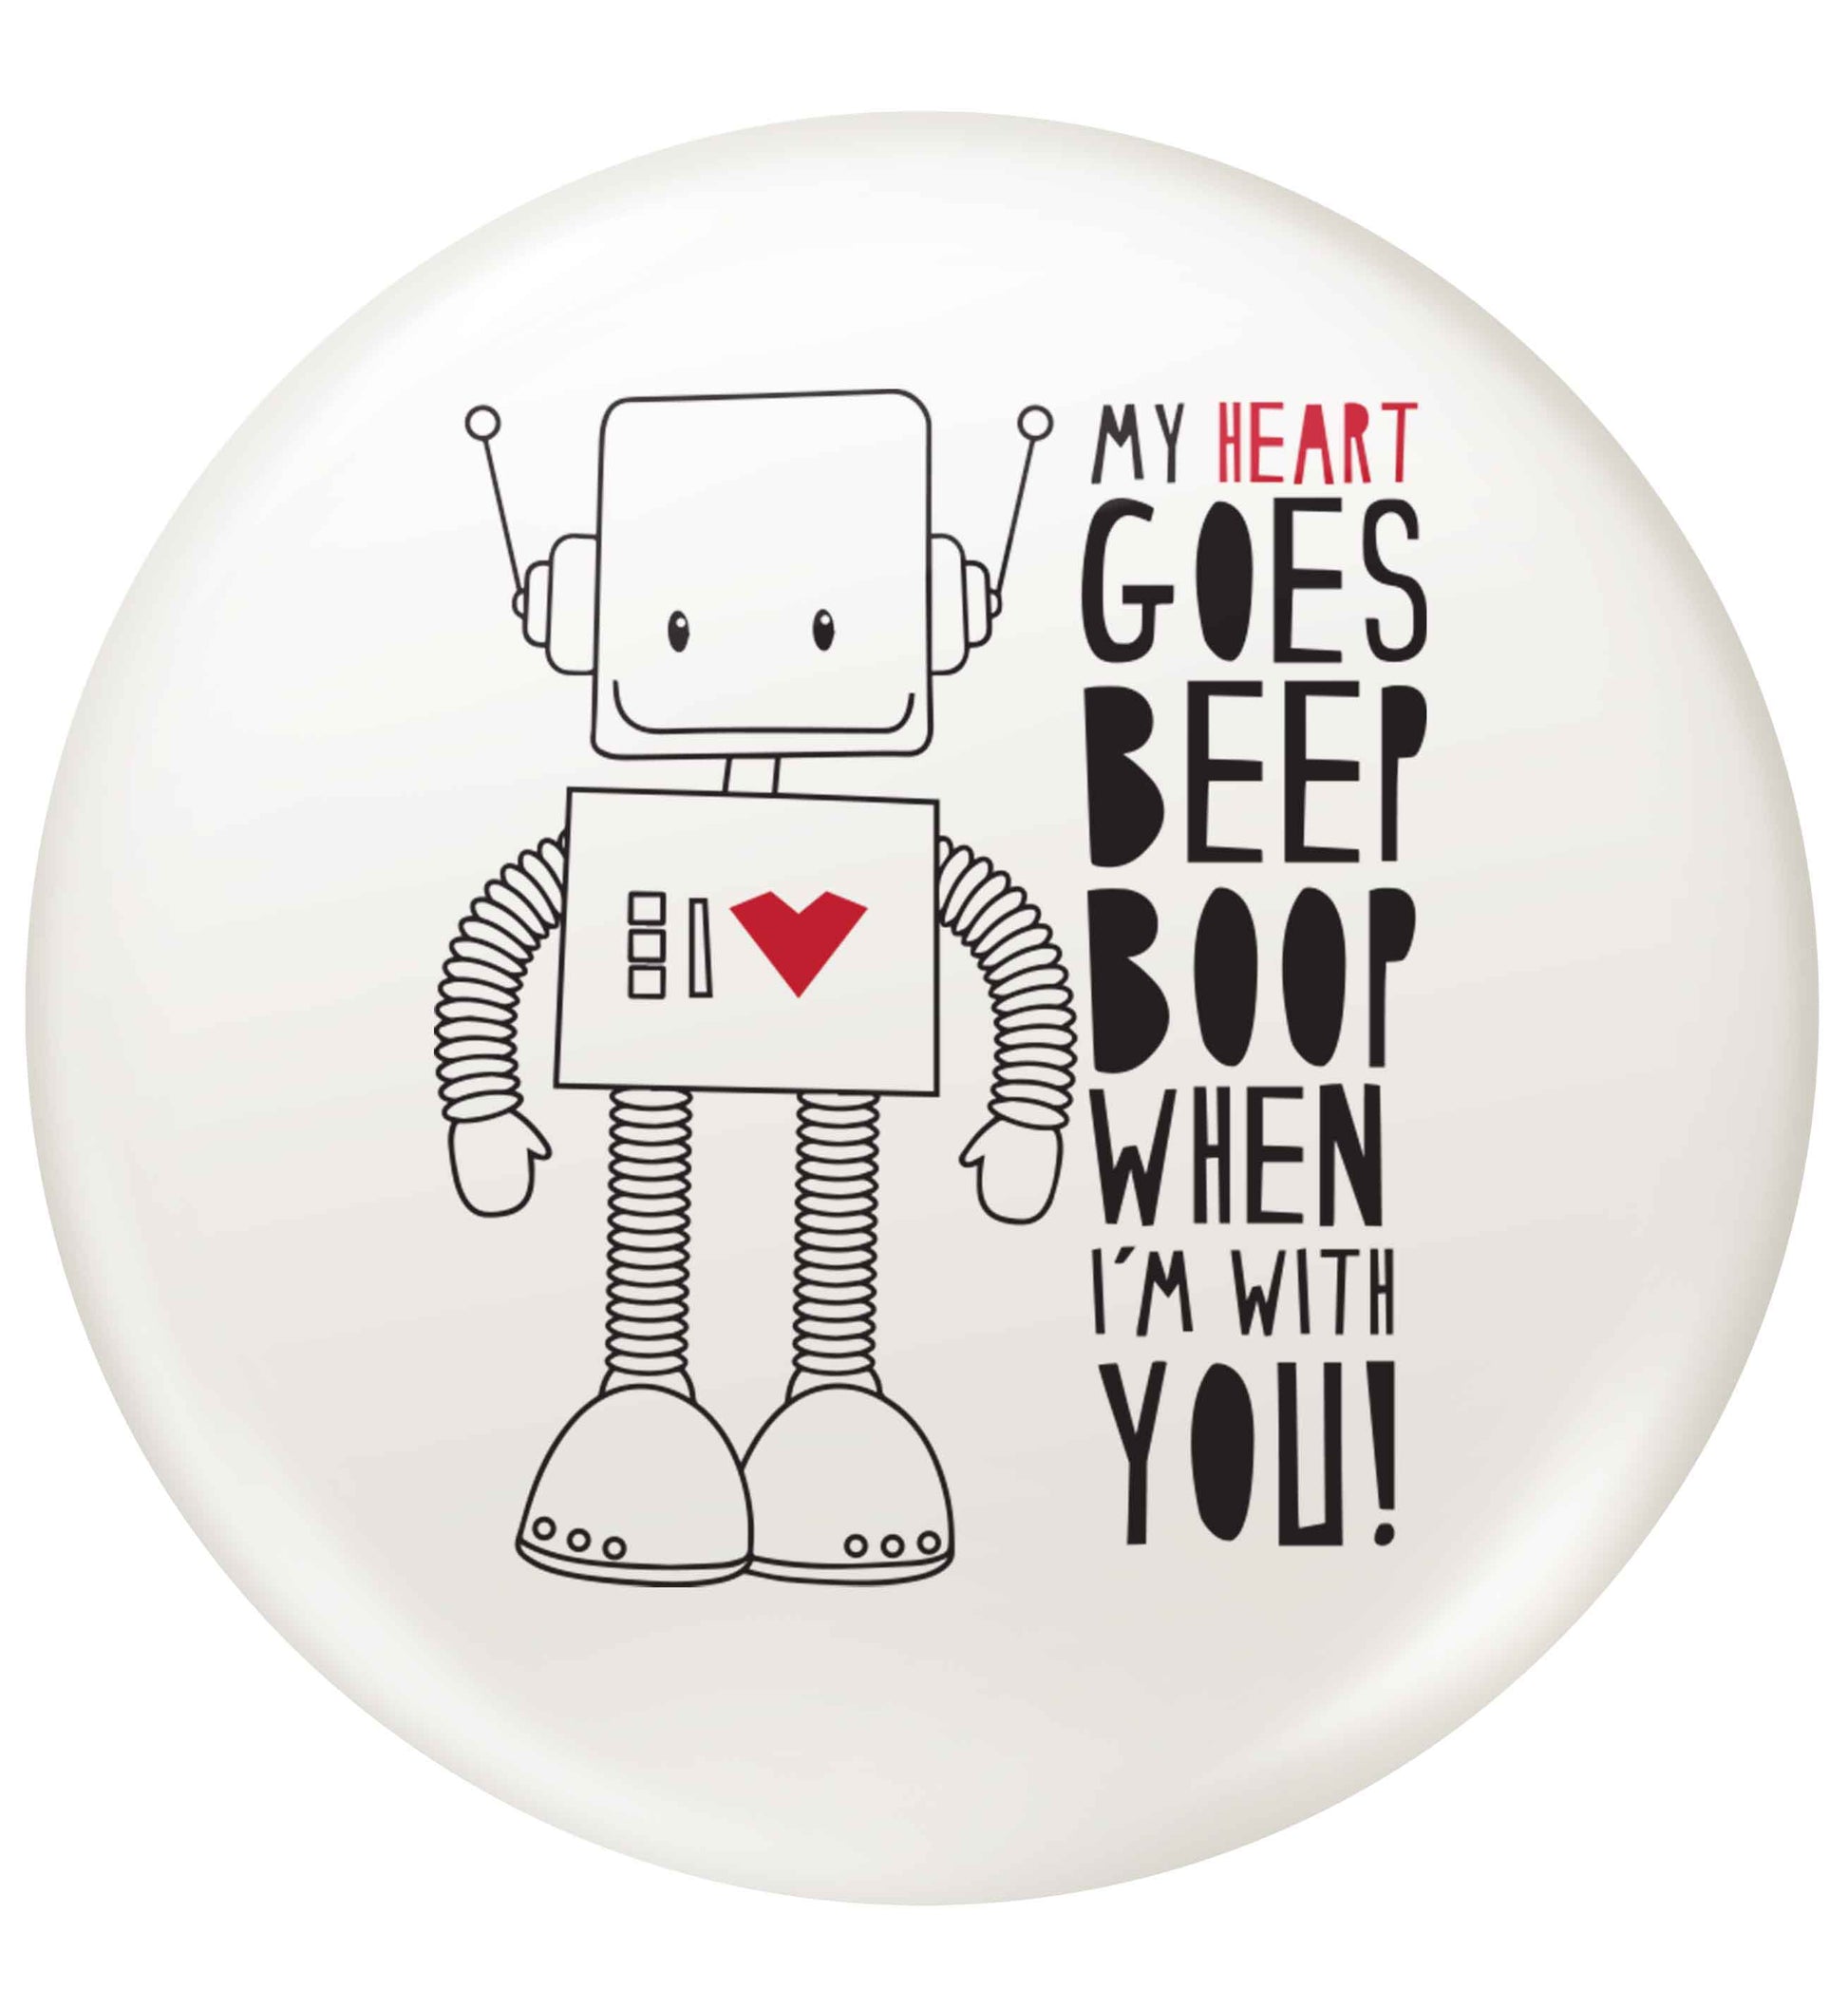 My heart goes beep boop when I'm with you small 25mm Pin badge